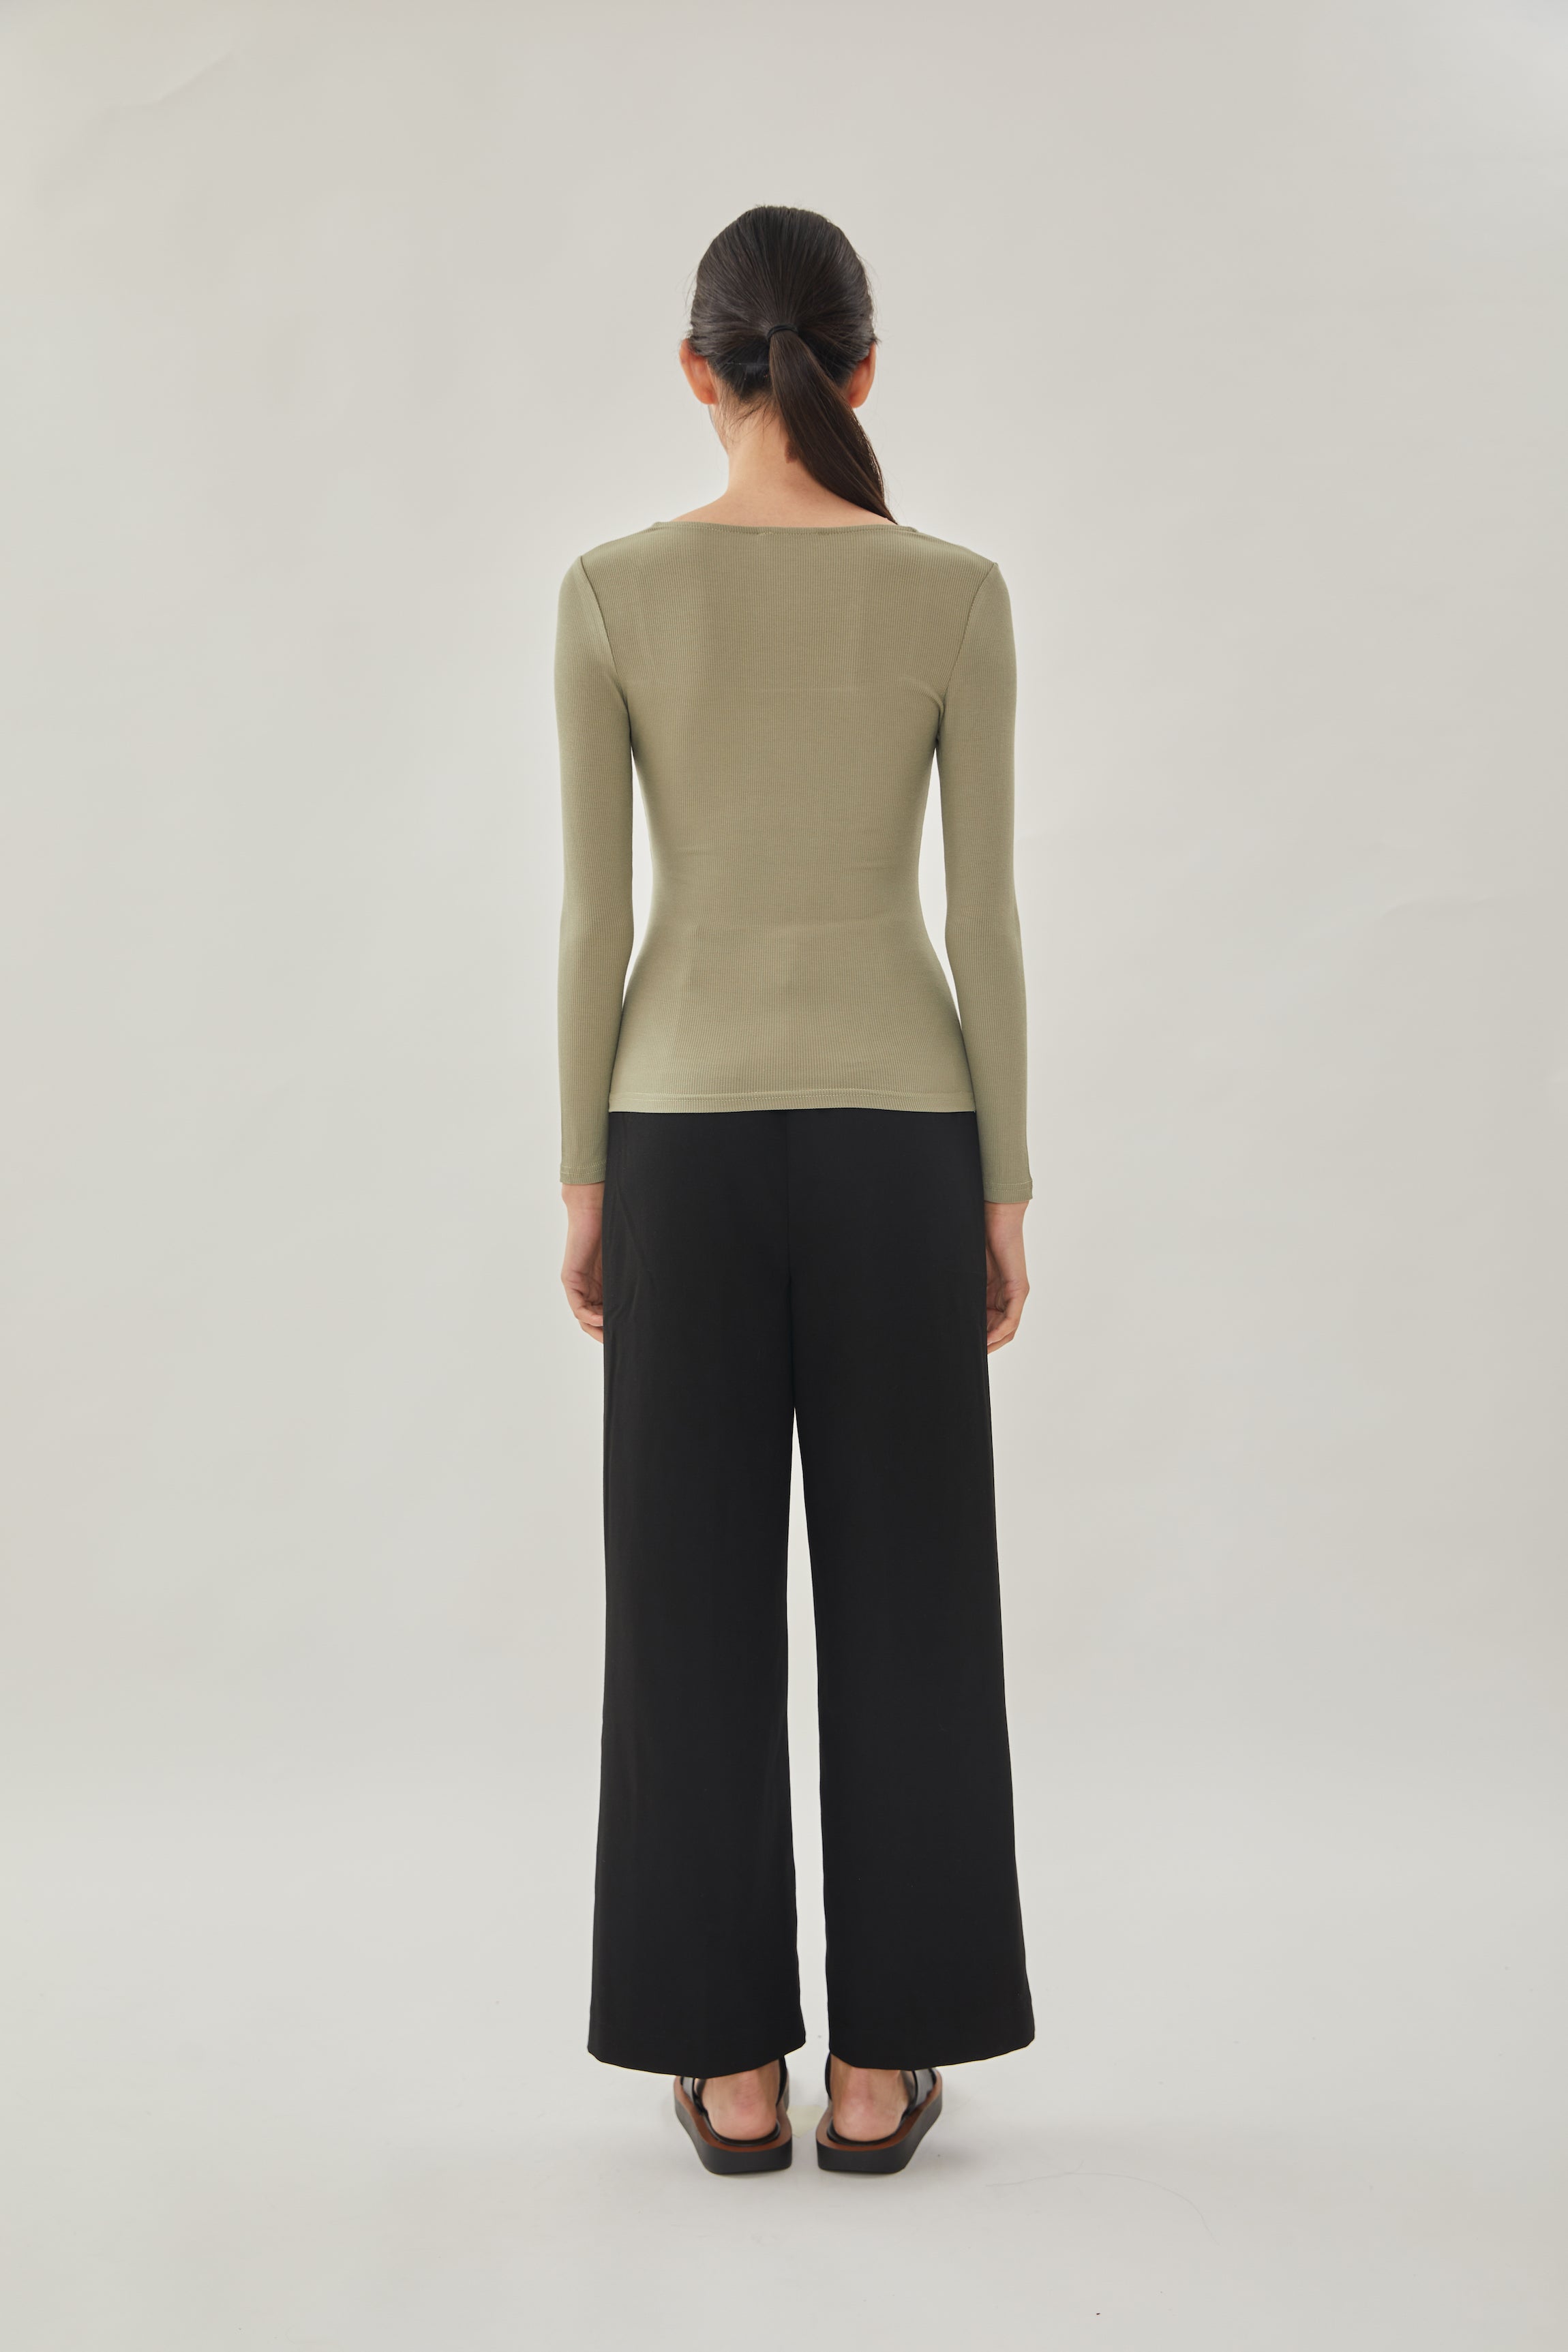 Square Neck Knit Top in Olive